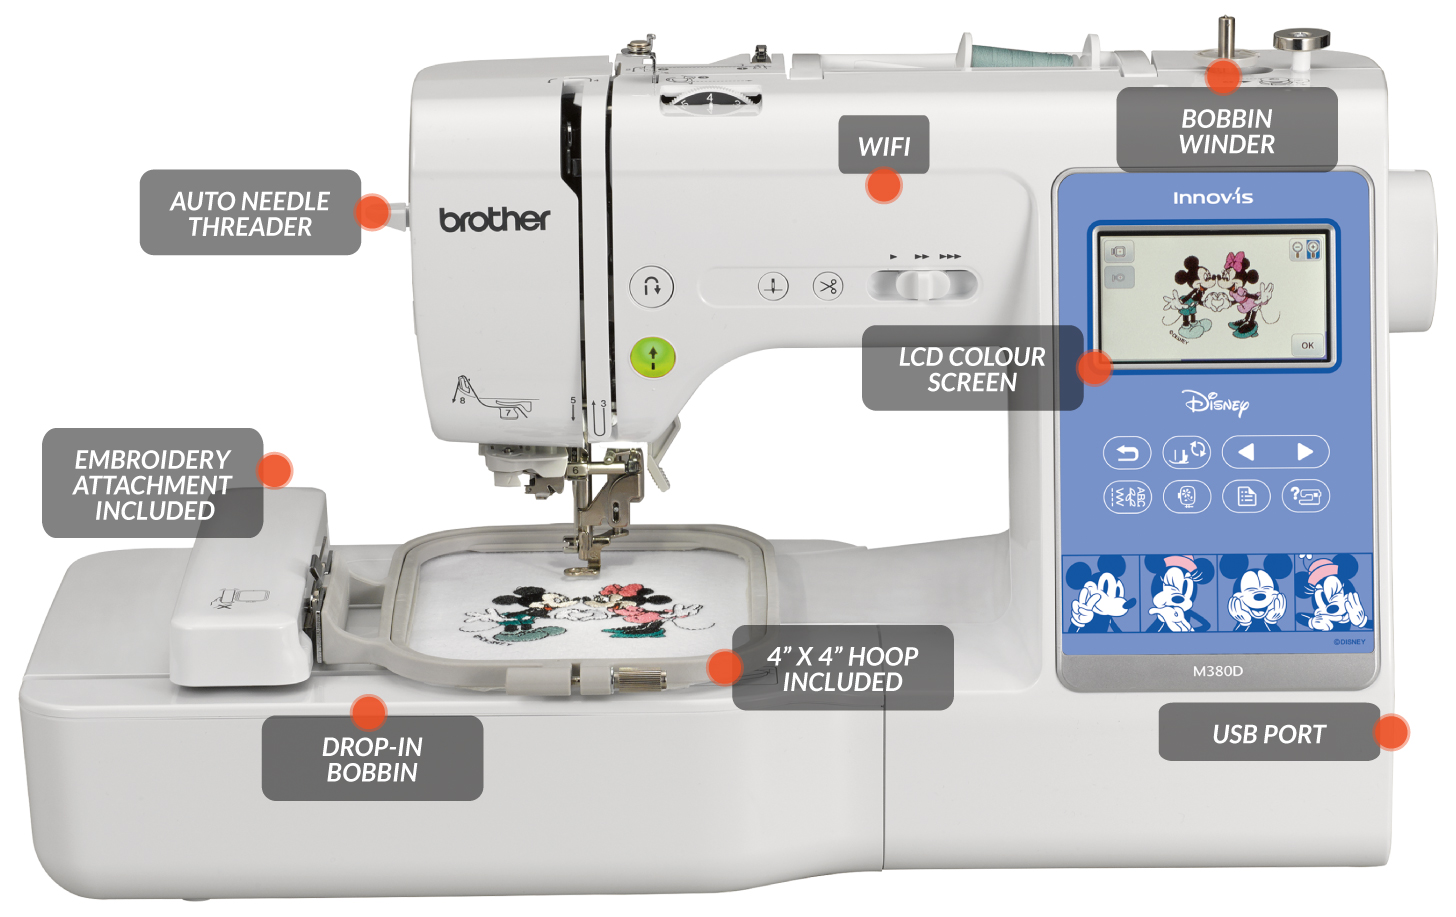 Echidna Sewing Brother M380D sewing and embroidery machine features